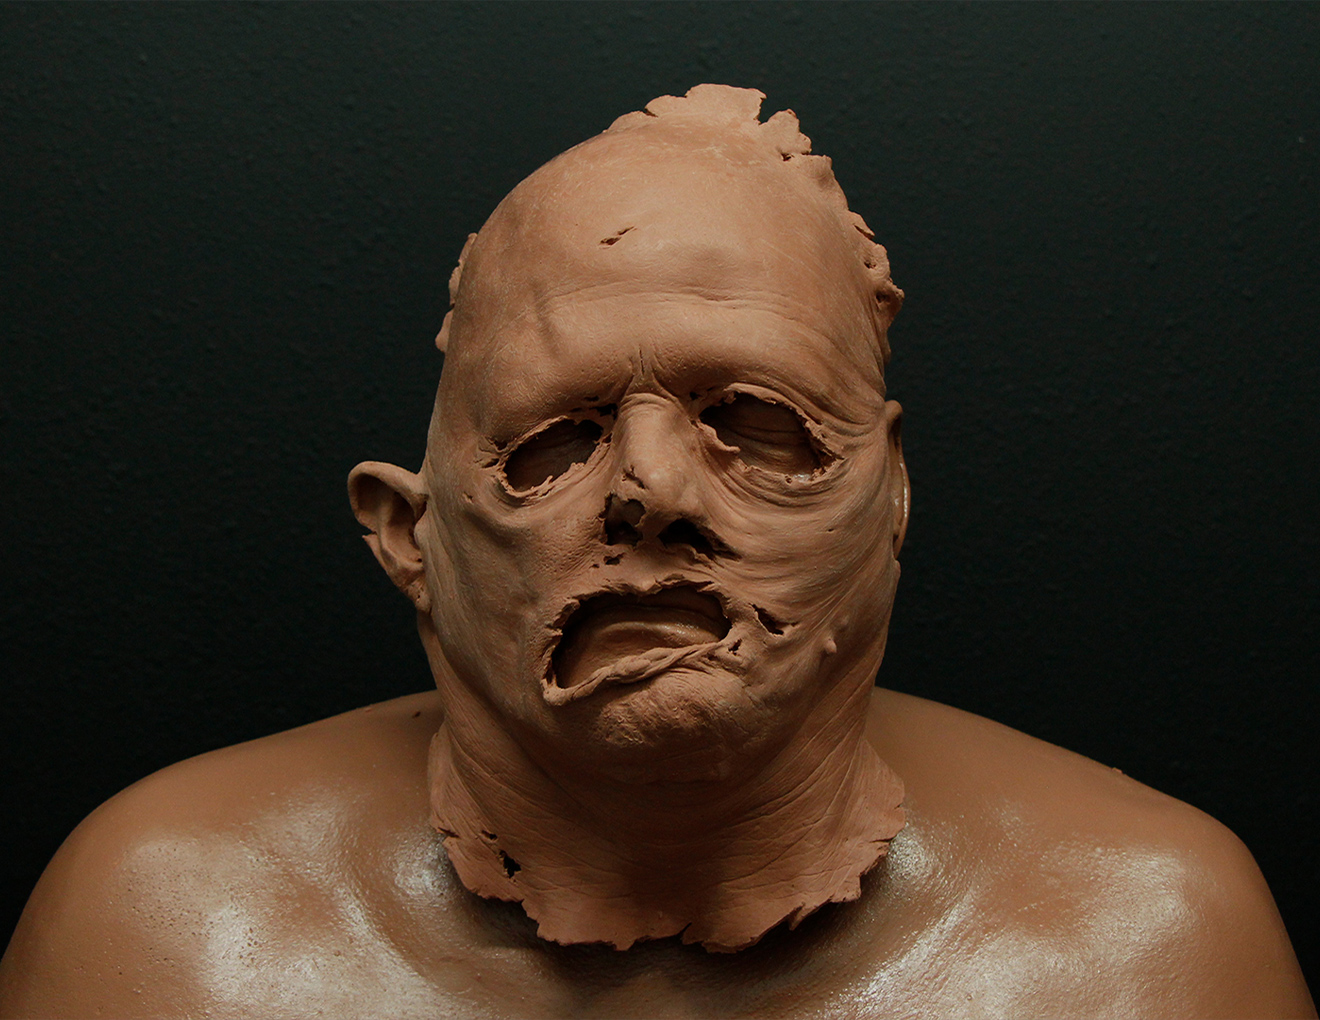 Texas Chainsaw Massacre' Effects Artist on Leatherface's New Mask